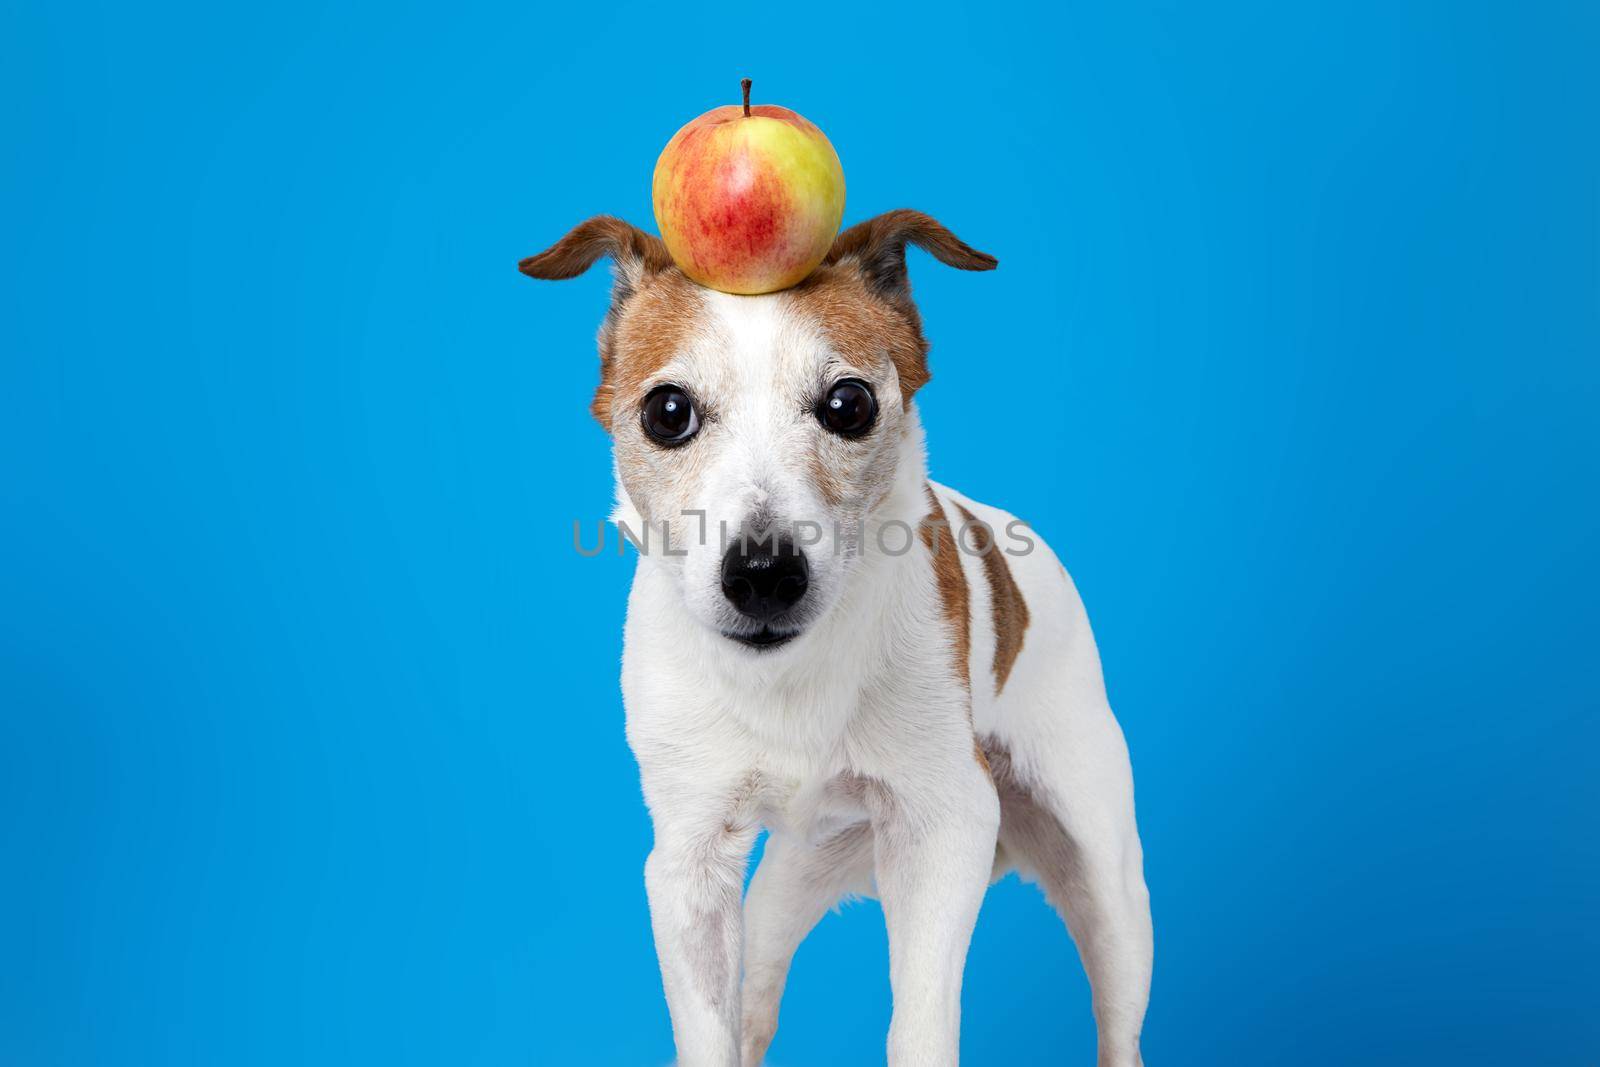 Funny dog with apple on head blue background by Demkat